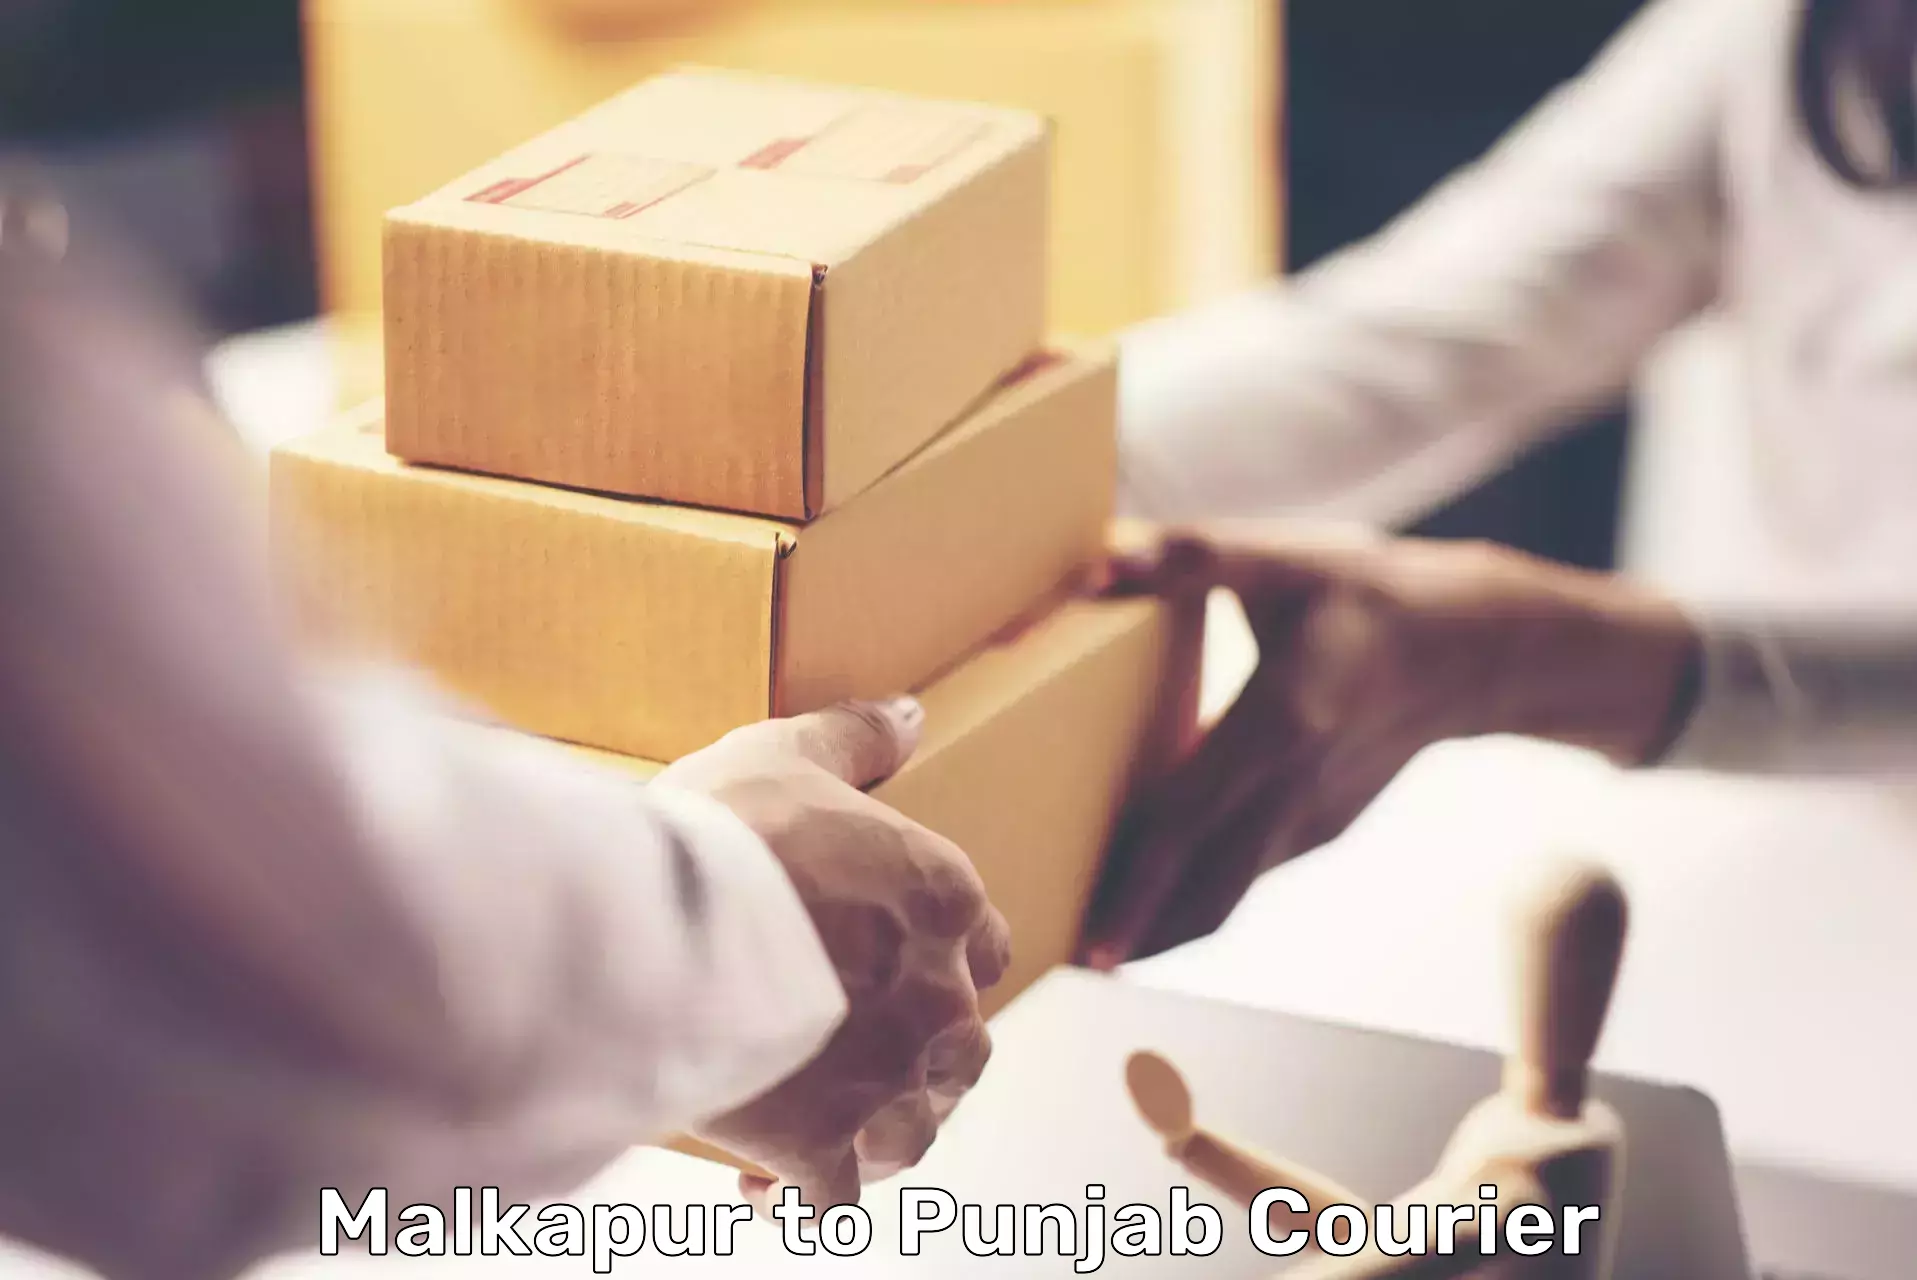 Professional parcel services Malkapur to Mohali